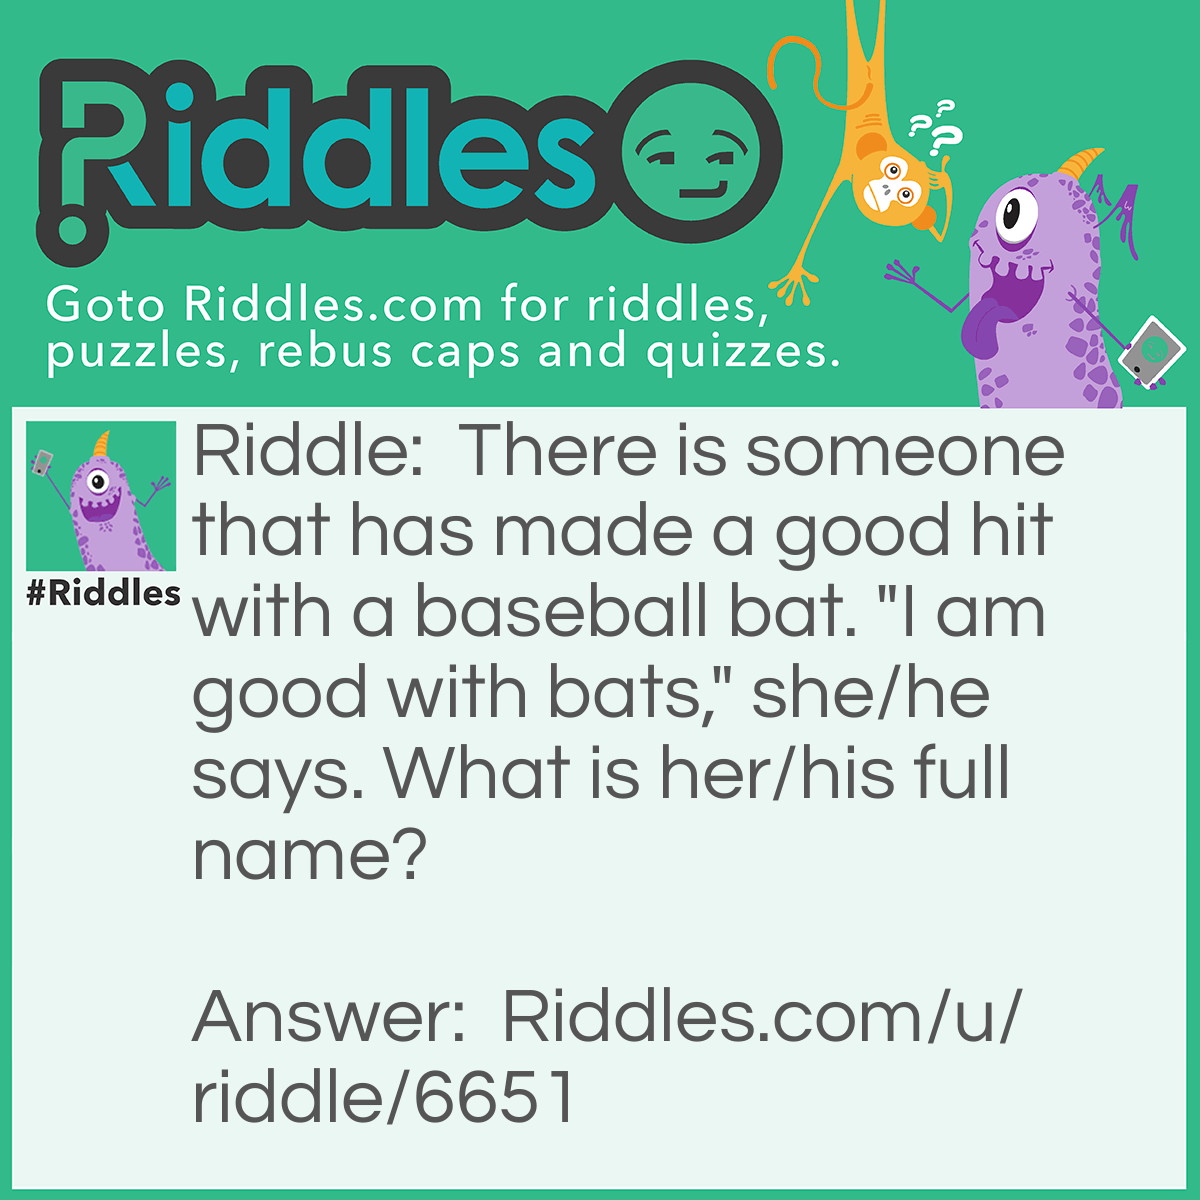 Riddle: There is someone that has made a good hit with a baseball bat. "I am good with bats," she/he says. What is her/his full name? Answer: Good With Bats.